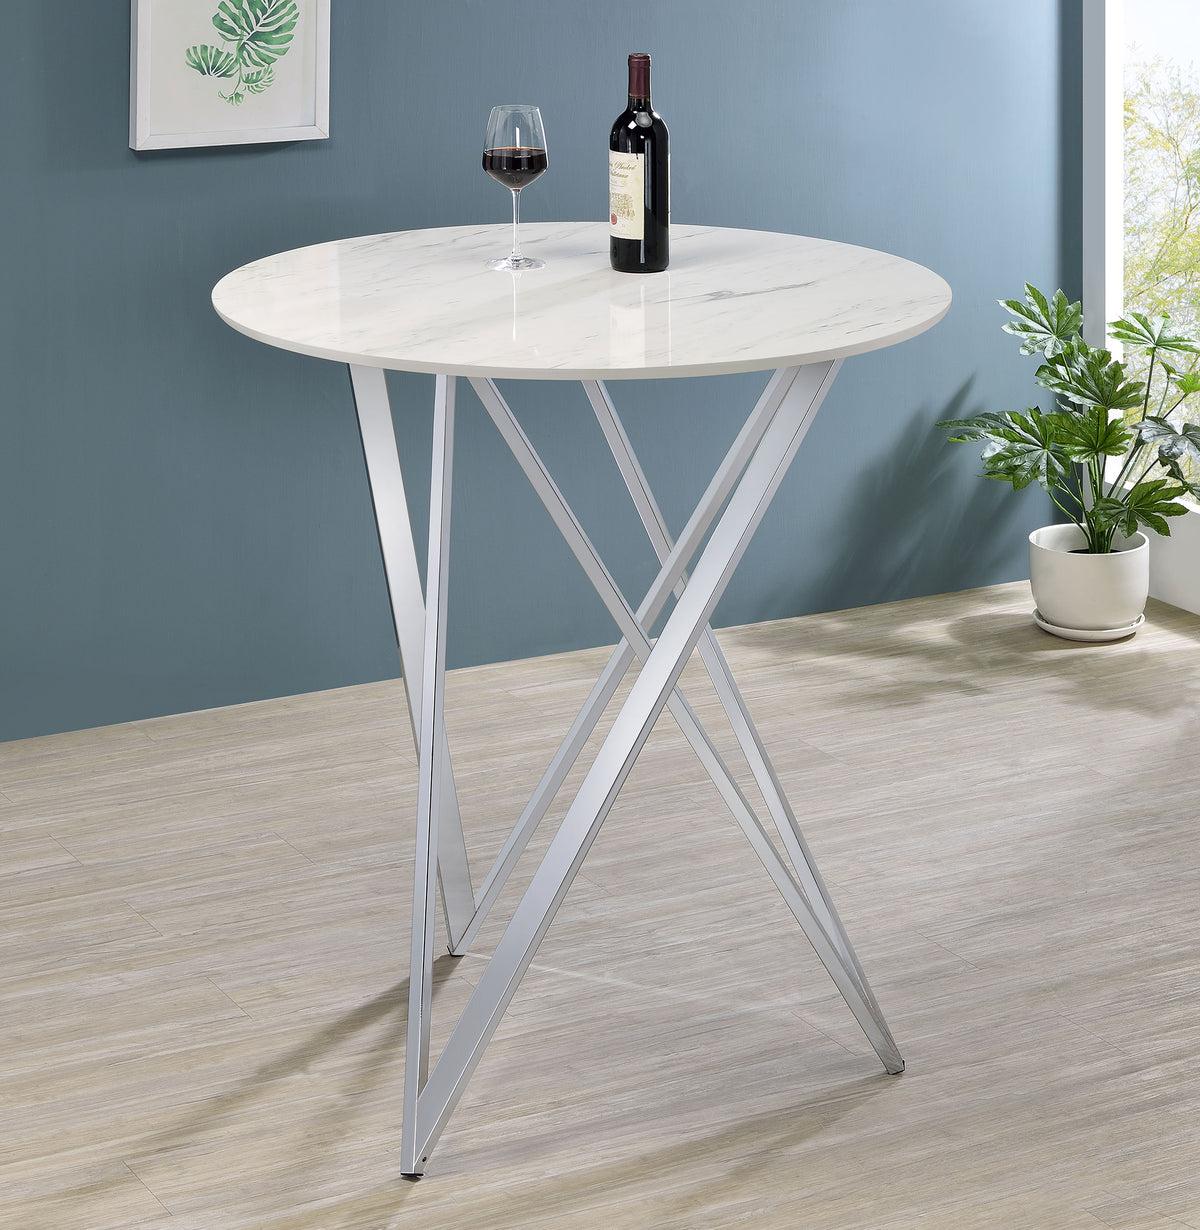 Bexter Faux Marble Round Top Bar Table White and Chrome Bexter Faux Marble Round Top Bar Table White and Chrome Half Price Furniture